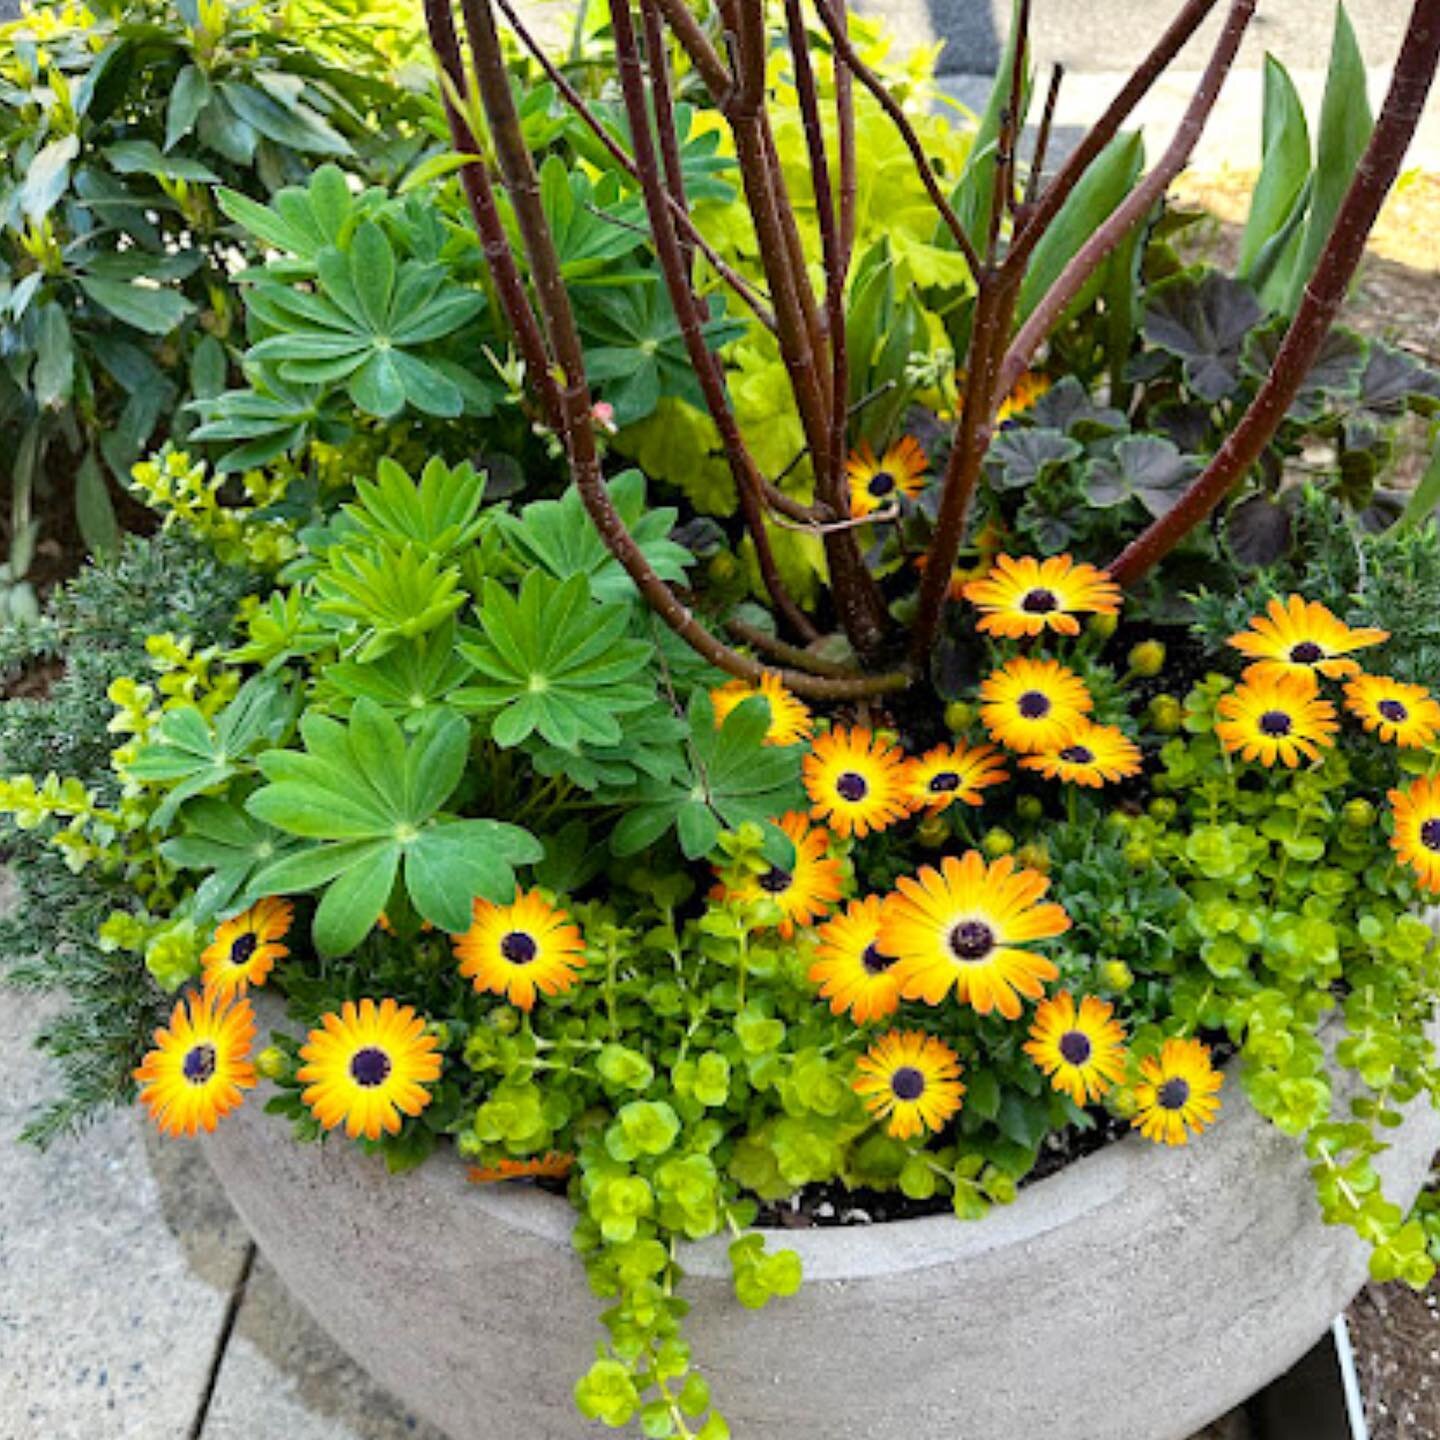 One thing I didn&rsquo;t inherit from my mother is her green thumb, but I can certainly appreciate the beauty and artistry of a well-designed container arrangement like these in downtown Bethesda! Don&rsquo;t you love when the most beautiful things a